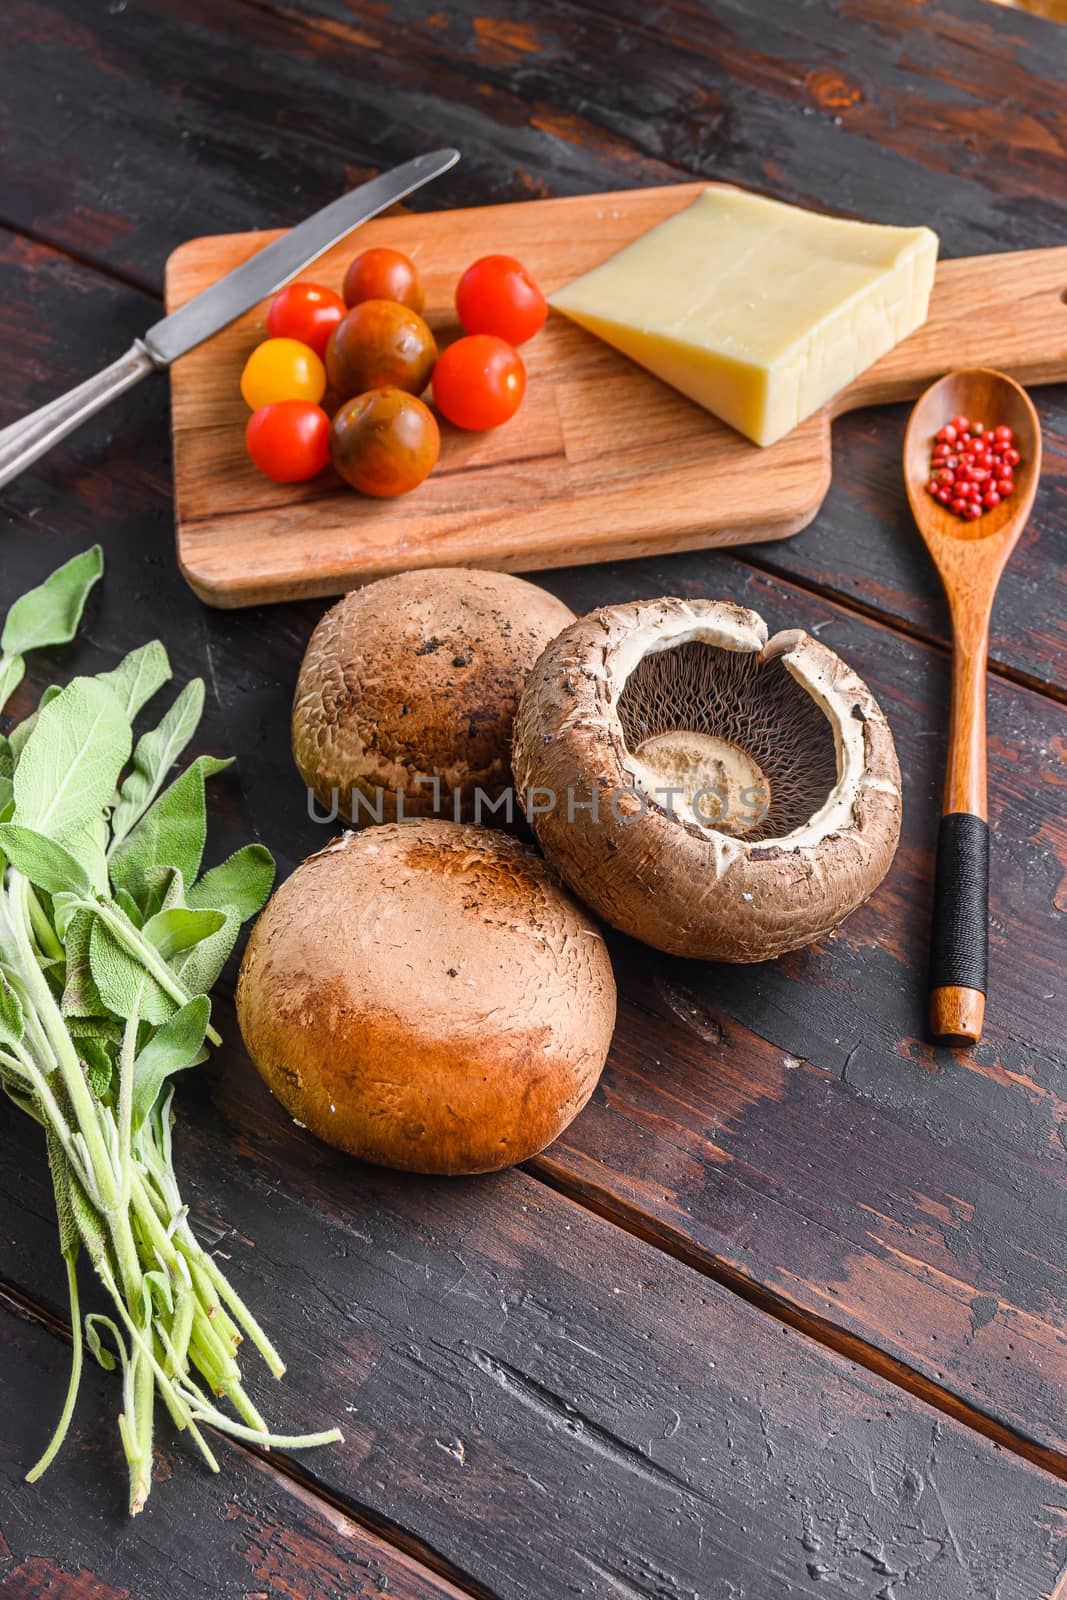 Portabello mushrooms ingredients for baking, cheddar cheese and sage on black background. Side view by Ilianesolenyi